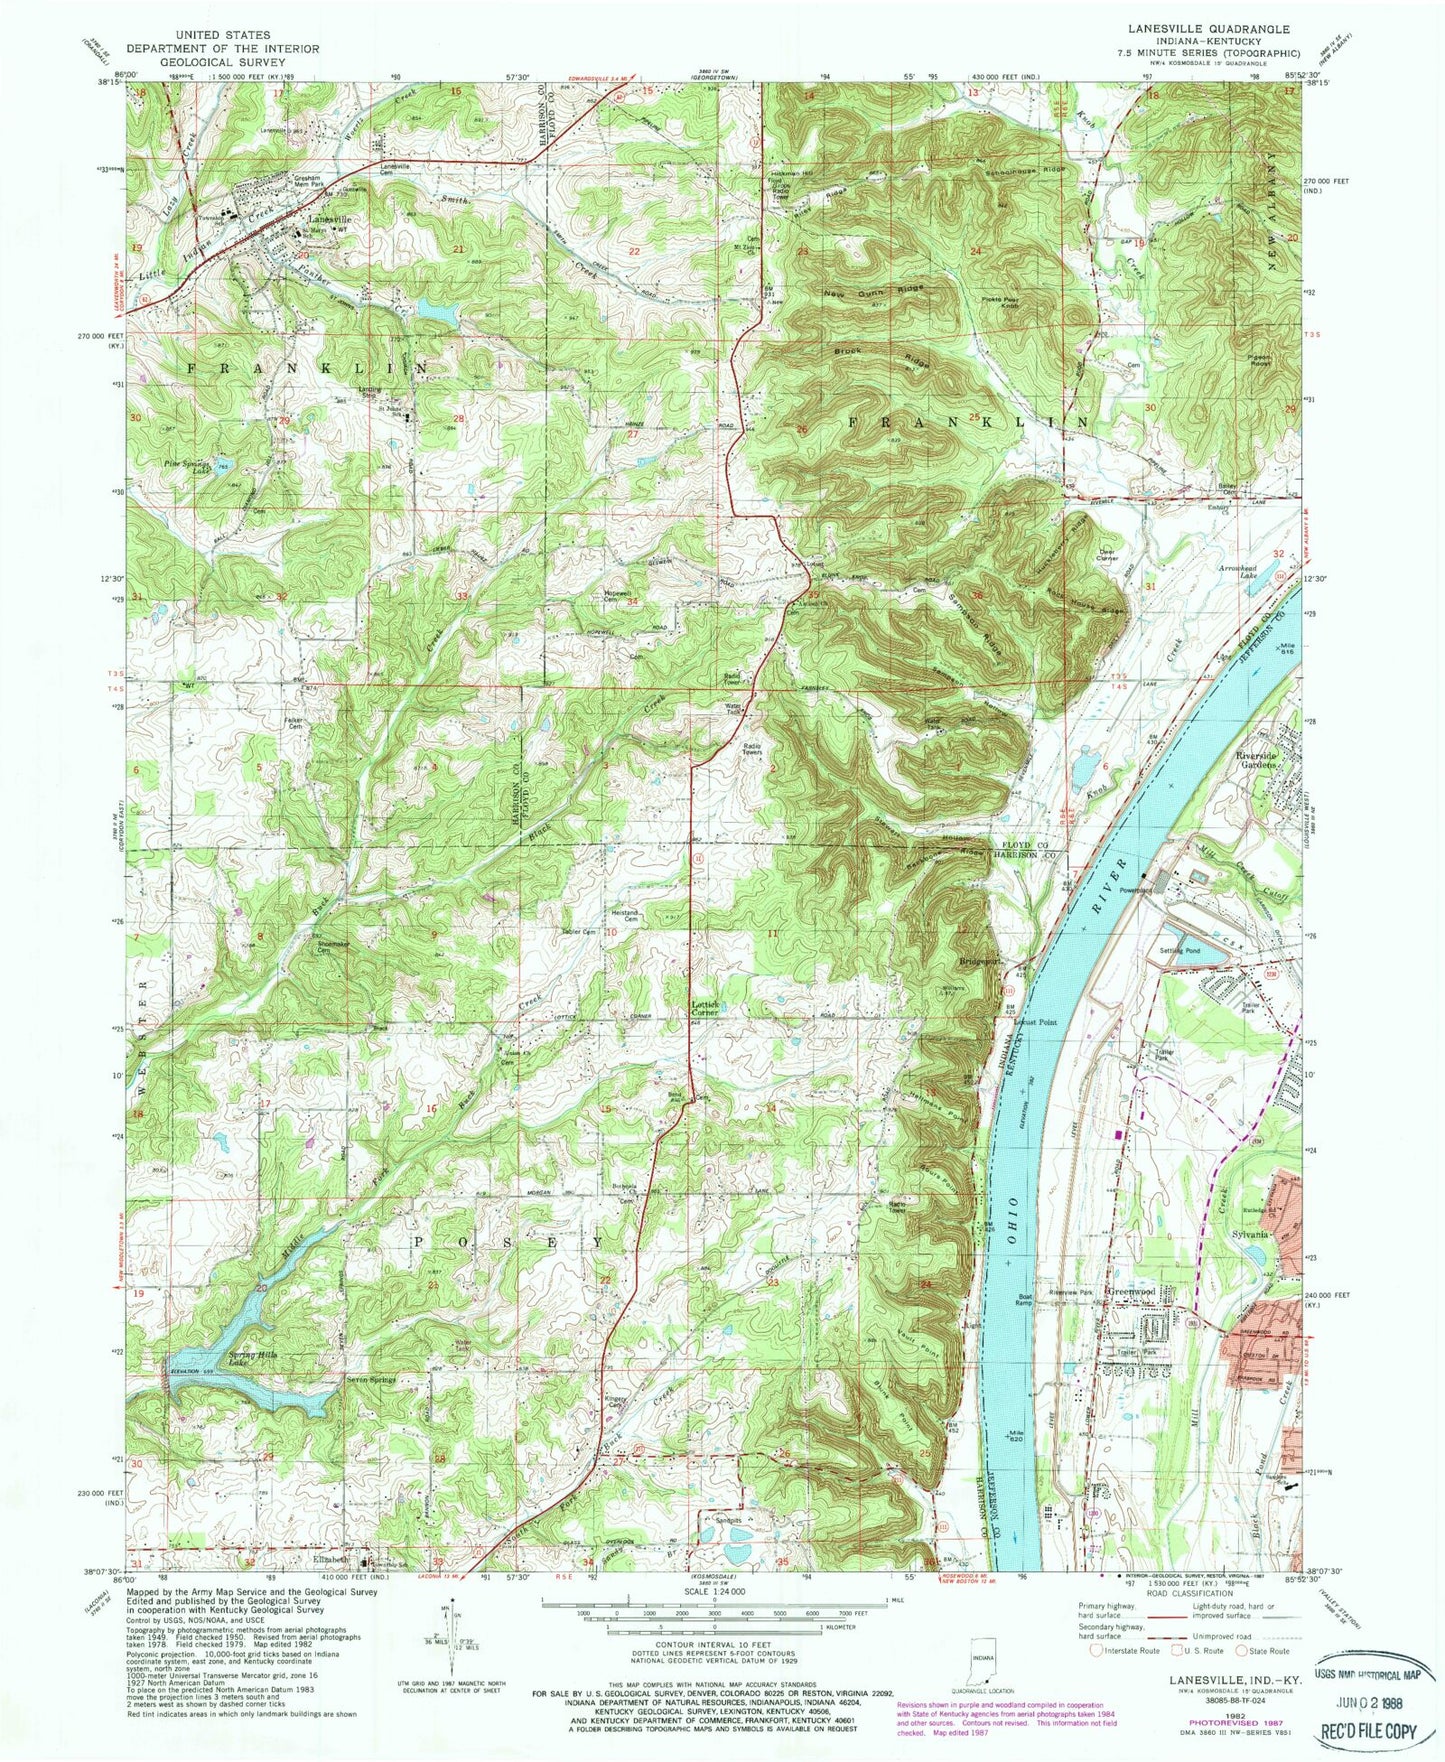 Classic USGS Lanesville Indiana 7.5'x7.5' Topo Map Image